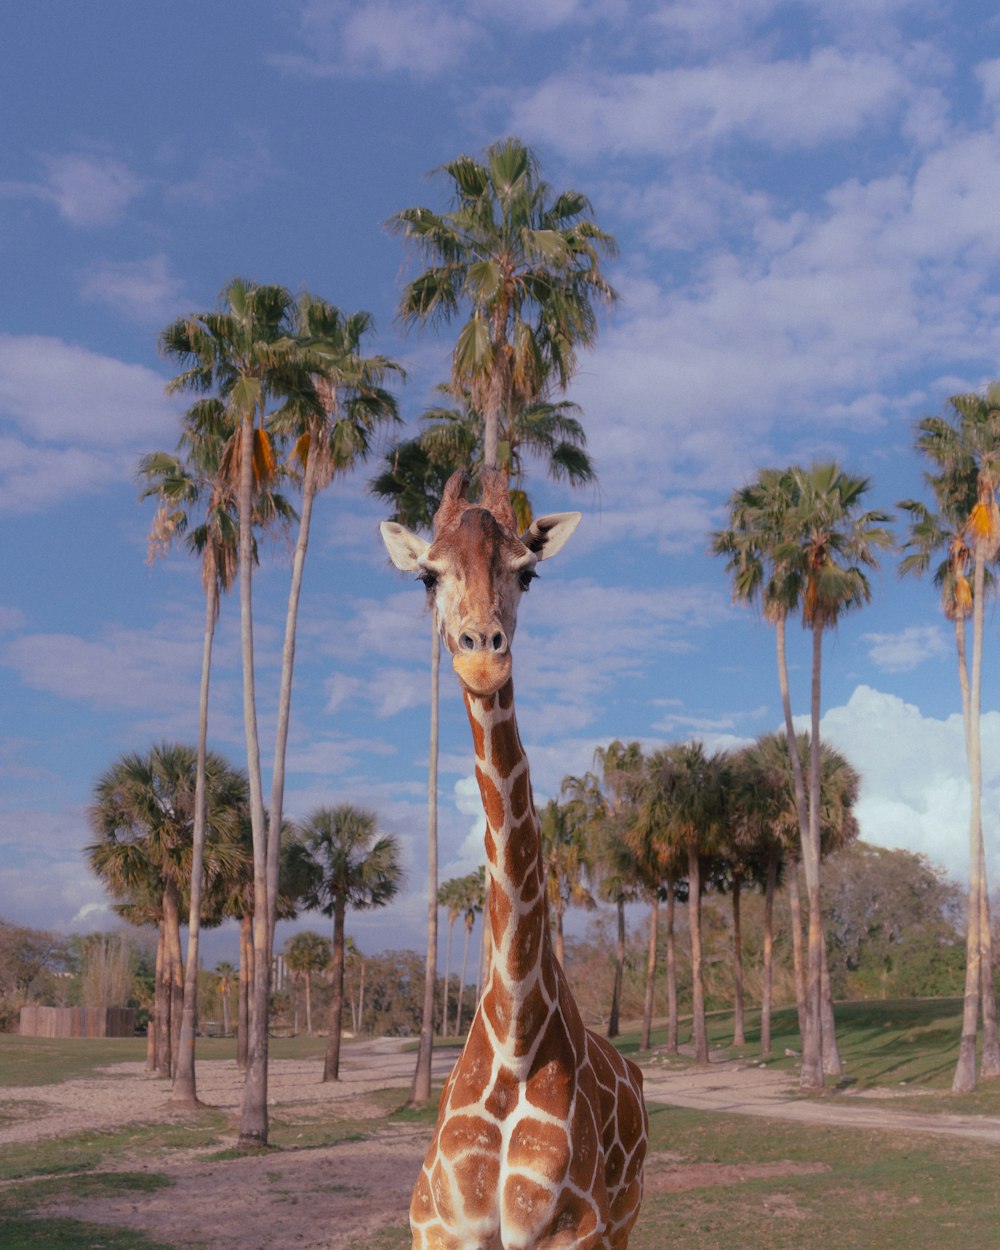 a giraffe standing in a field with palm trees